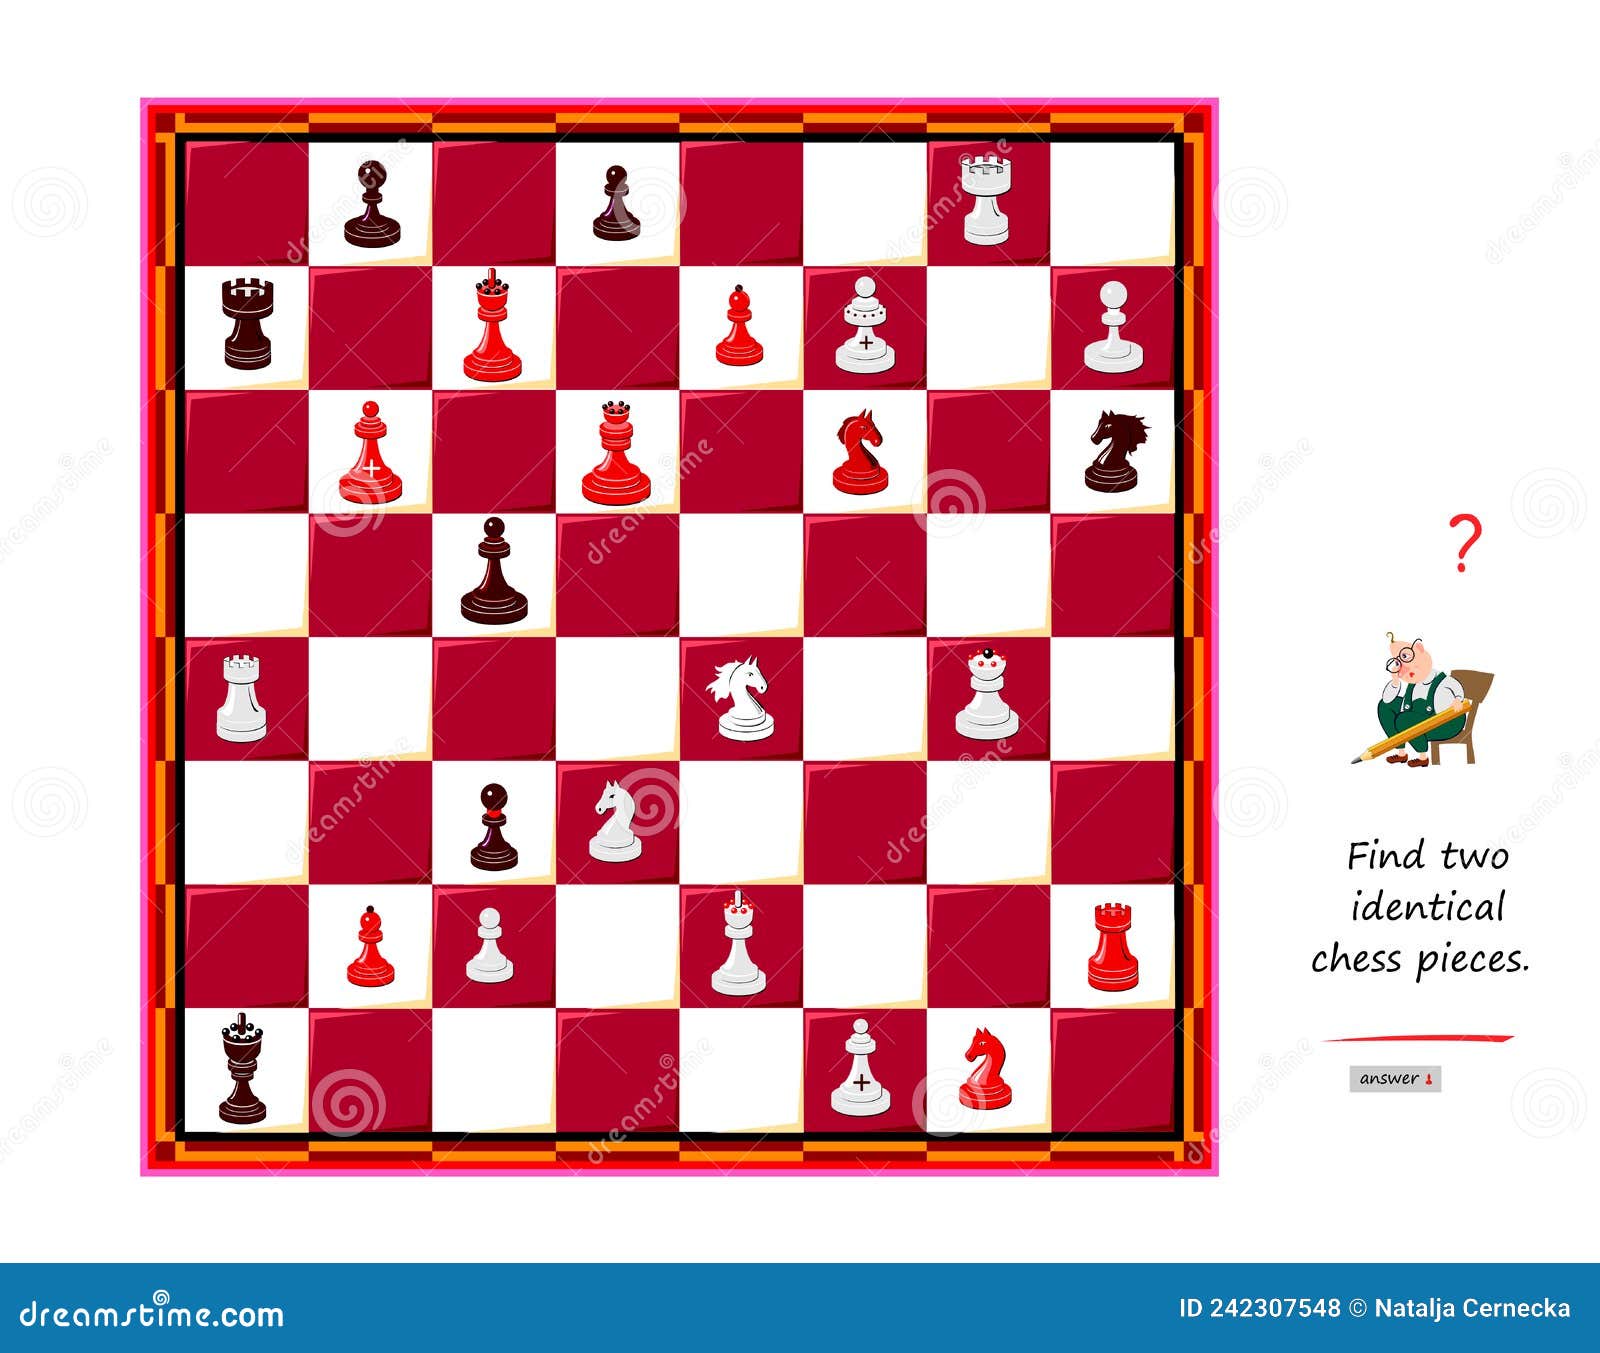 🕹️ Play Chess Game: Free Online 2 Player Chess Video Game for Kids & Adults